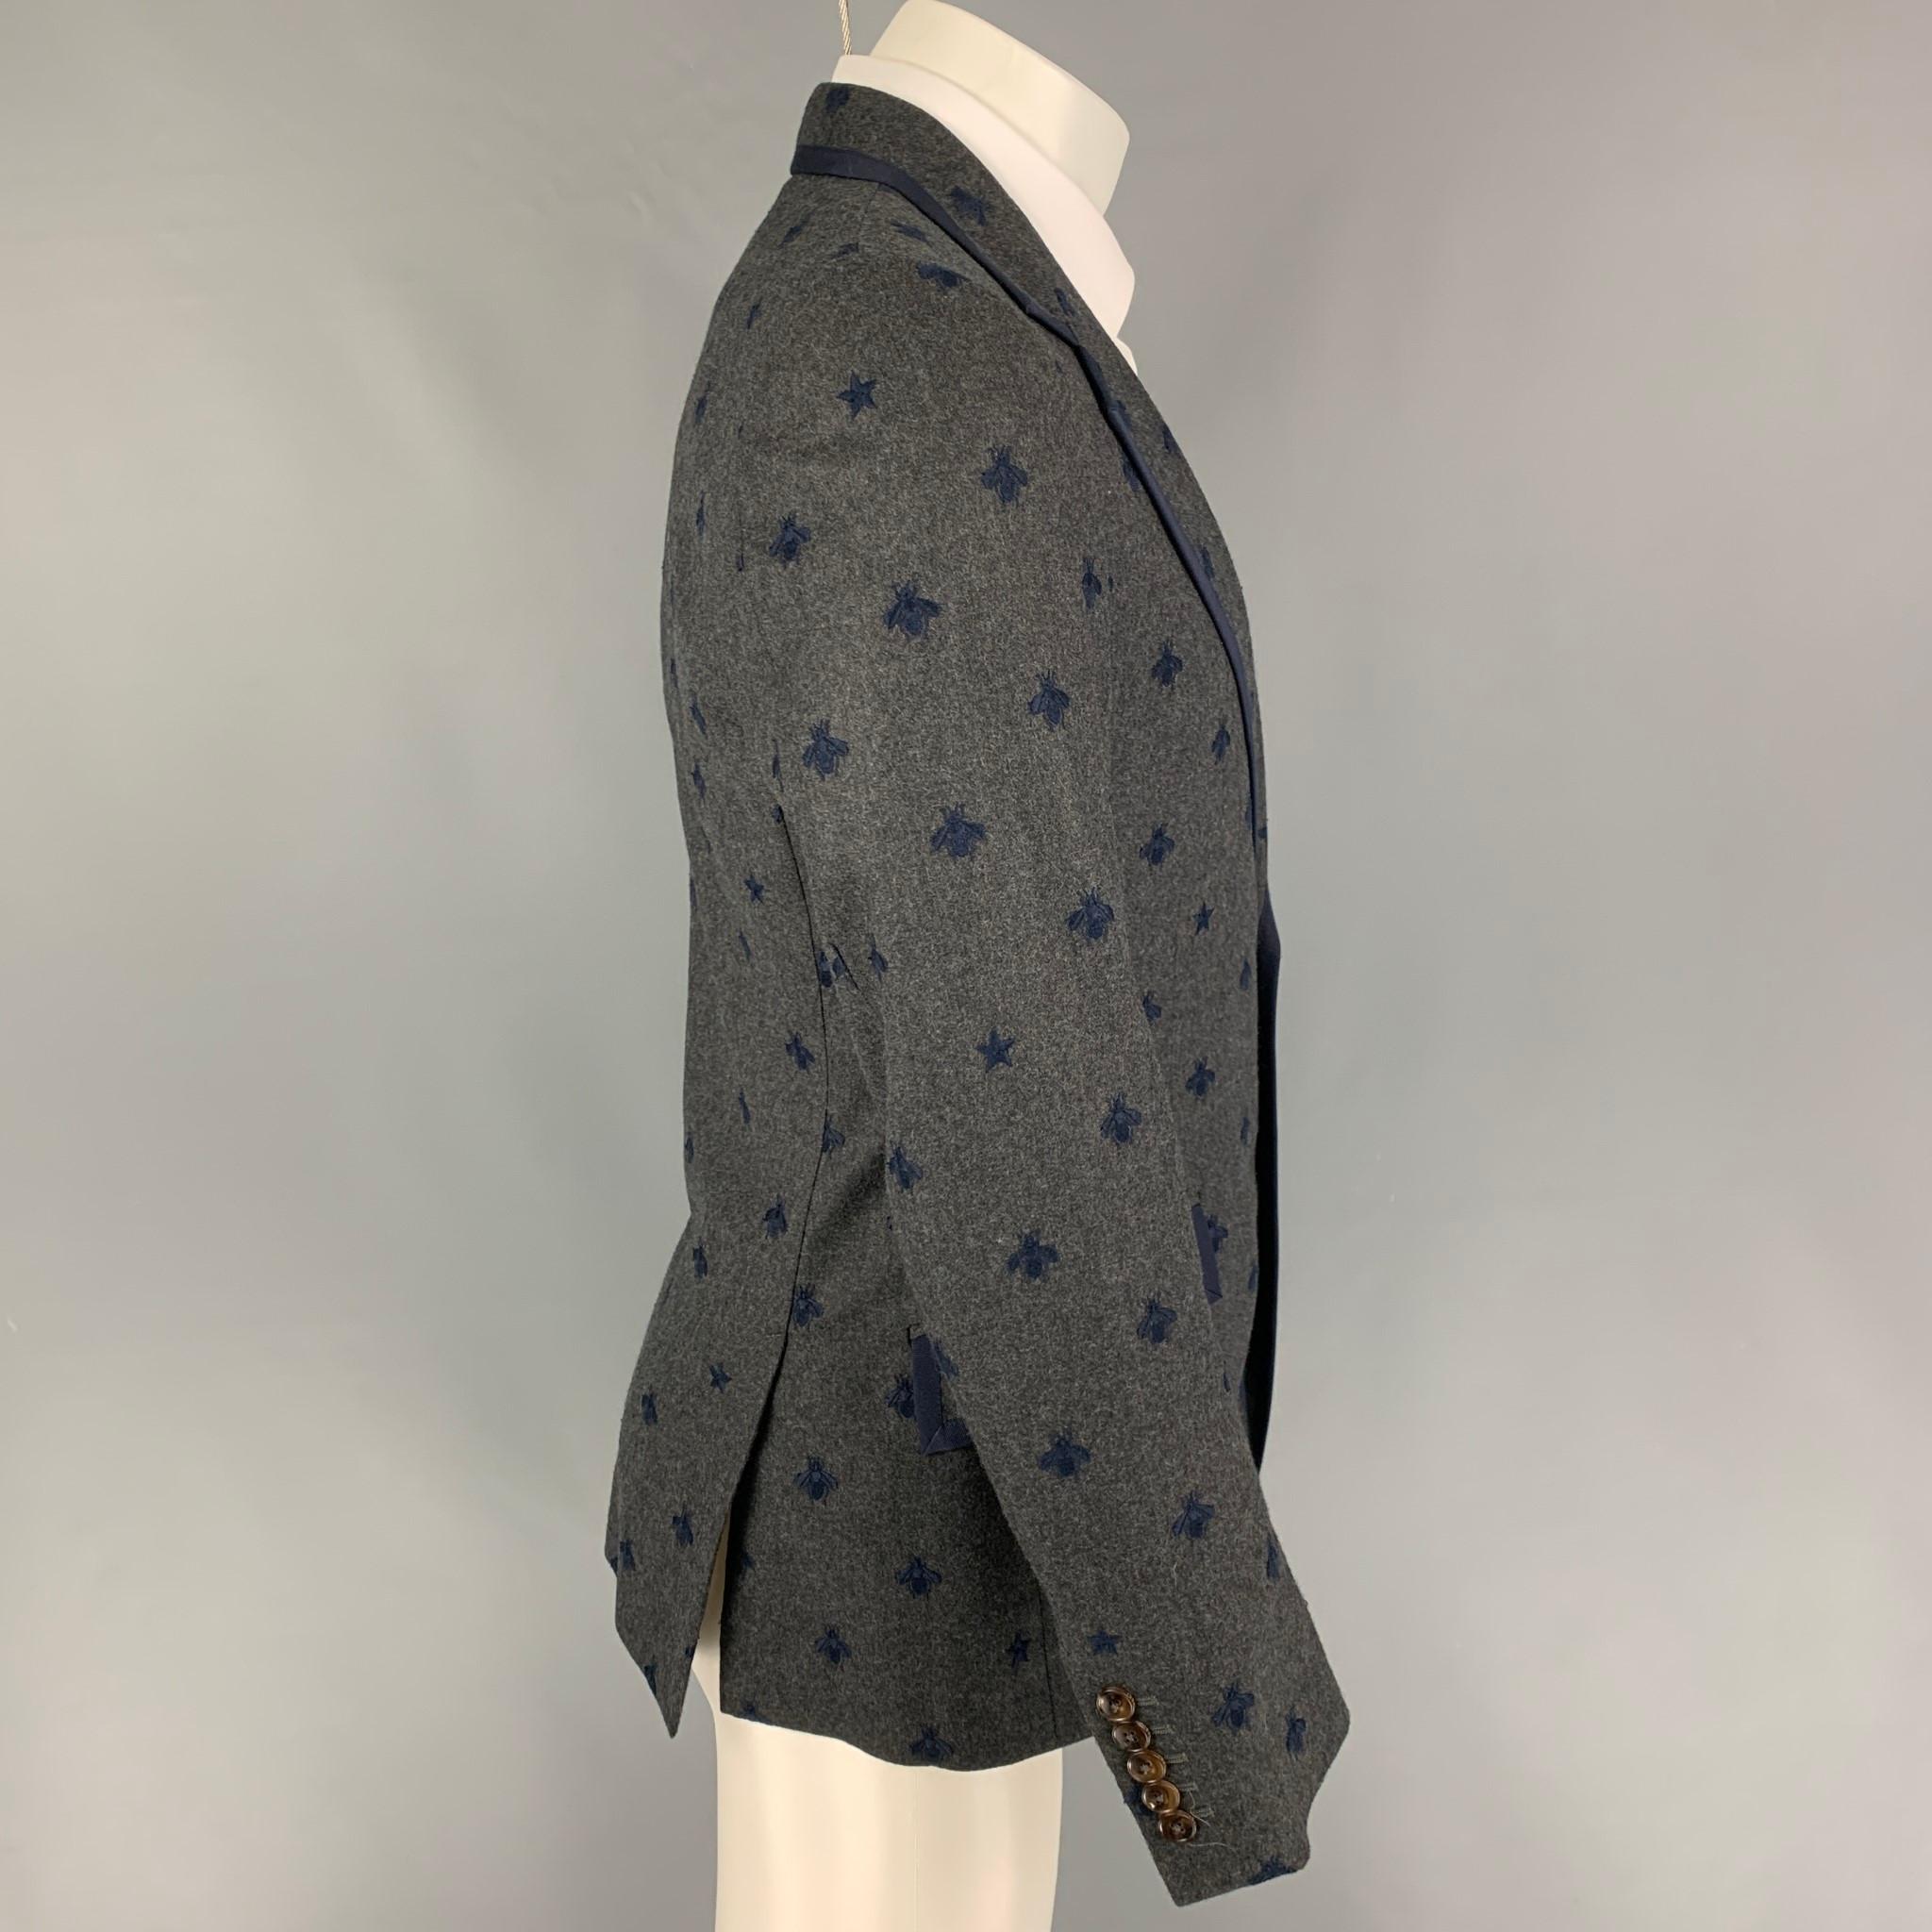 GUCCI sport coat comes in a charcoal wool with a full liner featuring navy 'Royal Bee' embroidery details, notch lapel, flap pocket, double back vent, and a two button closure. Made in Italy. 

Excellent Pre-Owned Condition.
Marked: 46